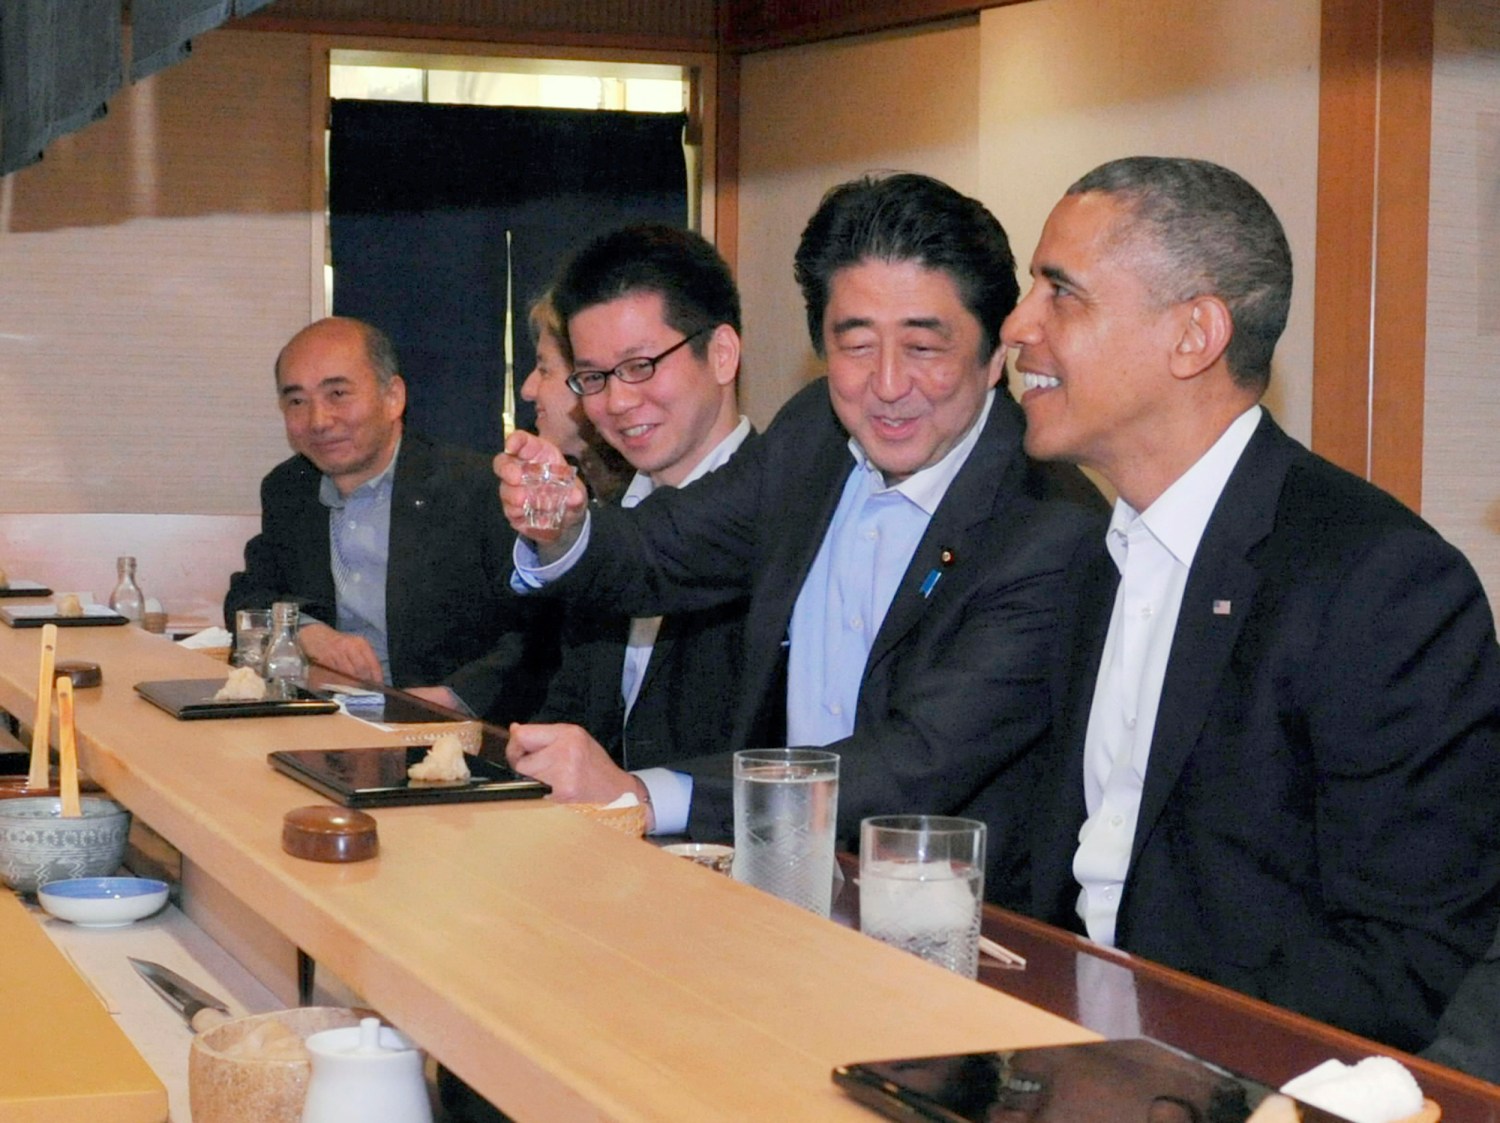 Reuters – Japanese Prime Minister Shinzo Abe (2nd R) shares a laugh with U.S. President Barack Obama (R) as they have dinner at the Sukiyabashi Jiro sushi restaurant in Tokyo, in this picture taken April 23, 2014.